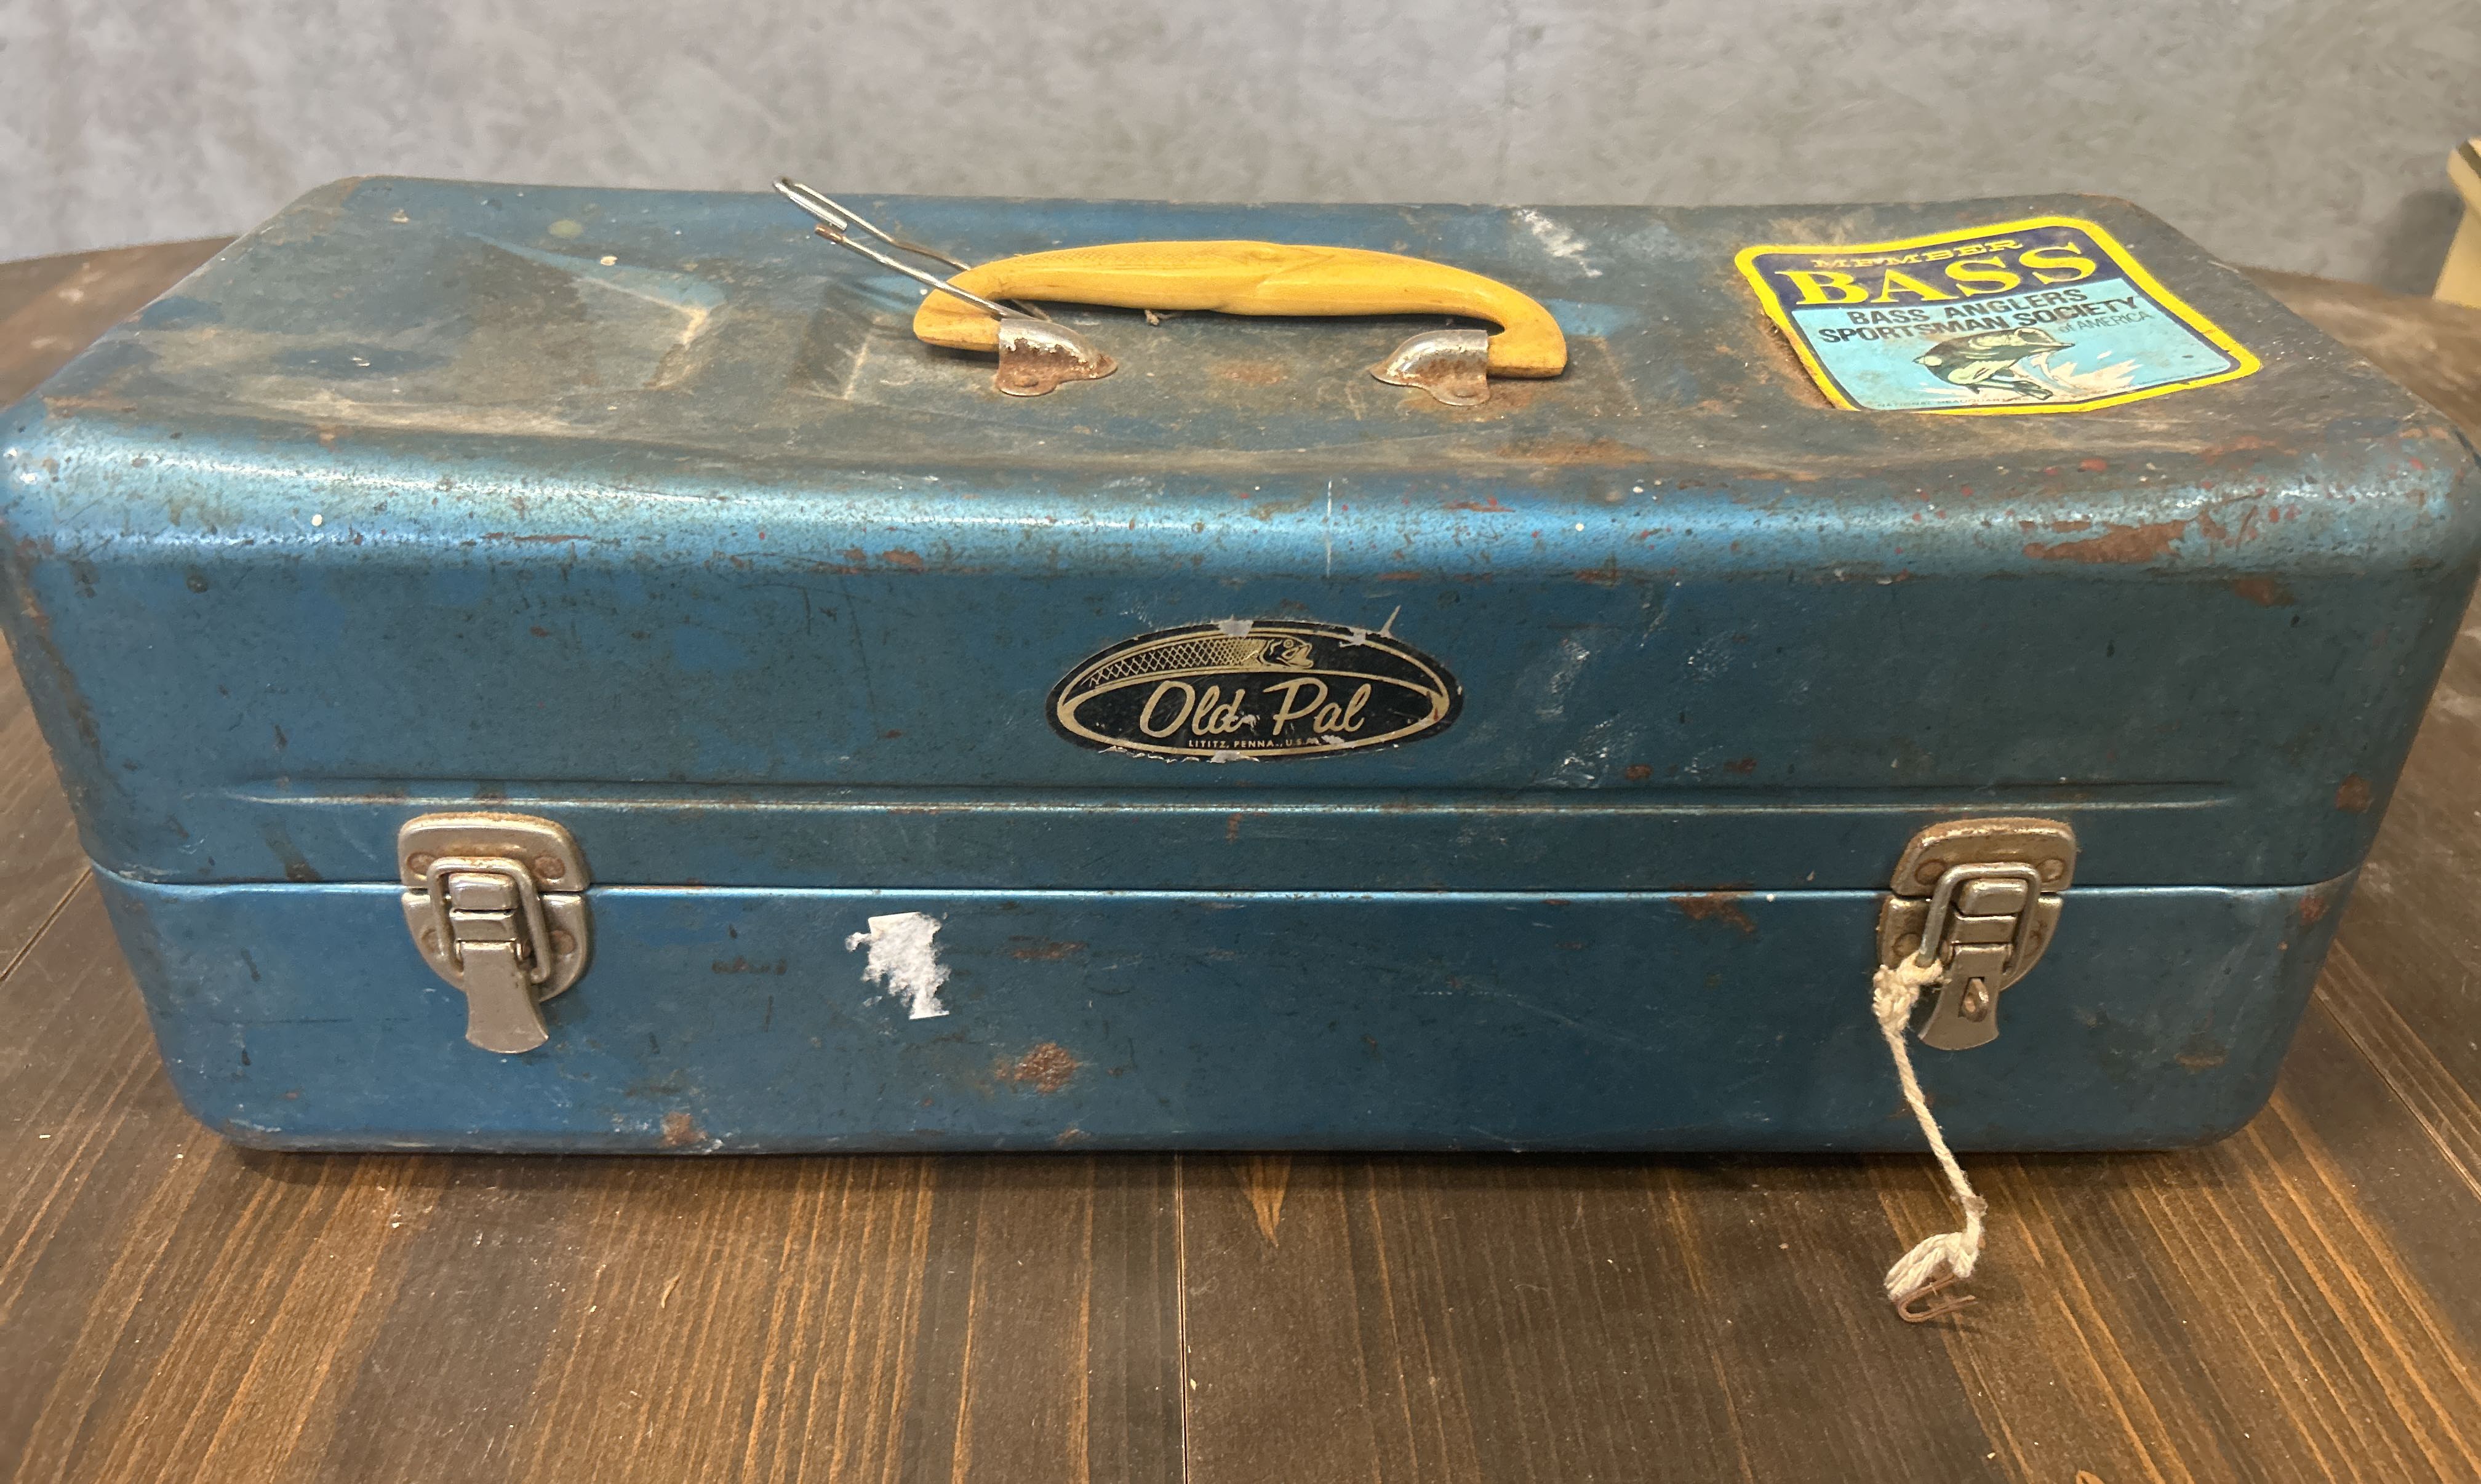 Sold at Auction: Vintage 2 Tier Metal Fishing Tackle Box w/ Fishing Tackle  Lures, Etc..